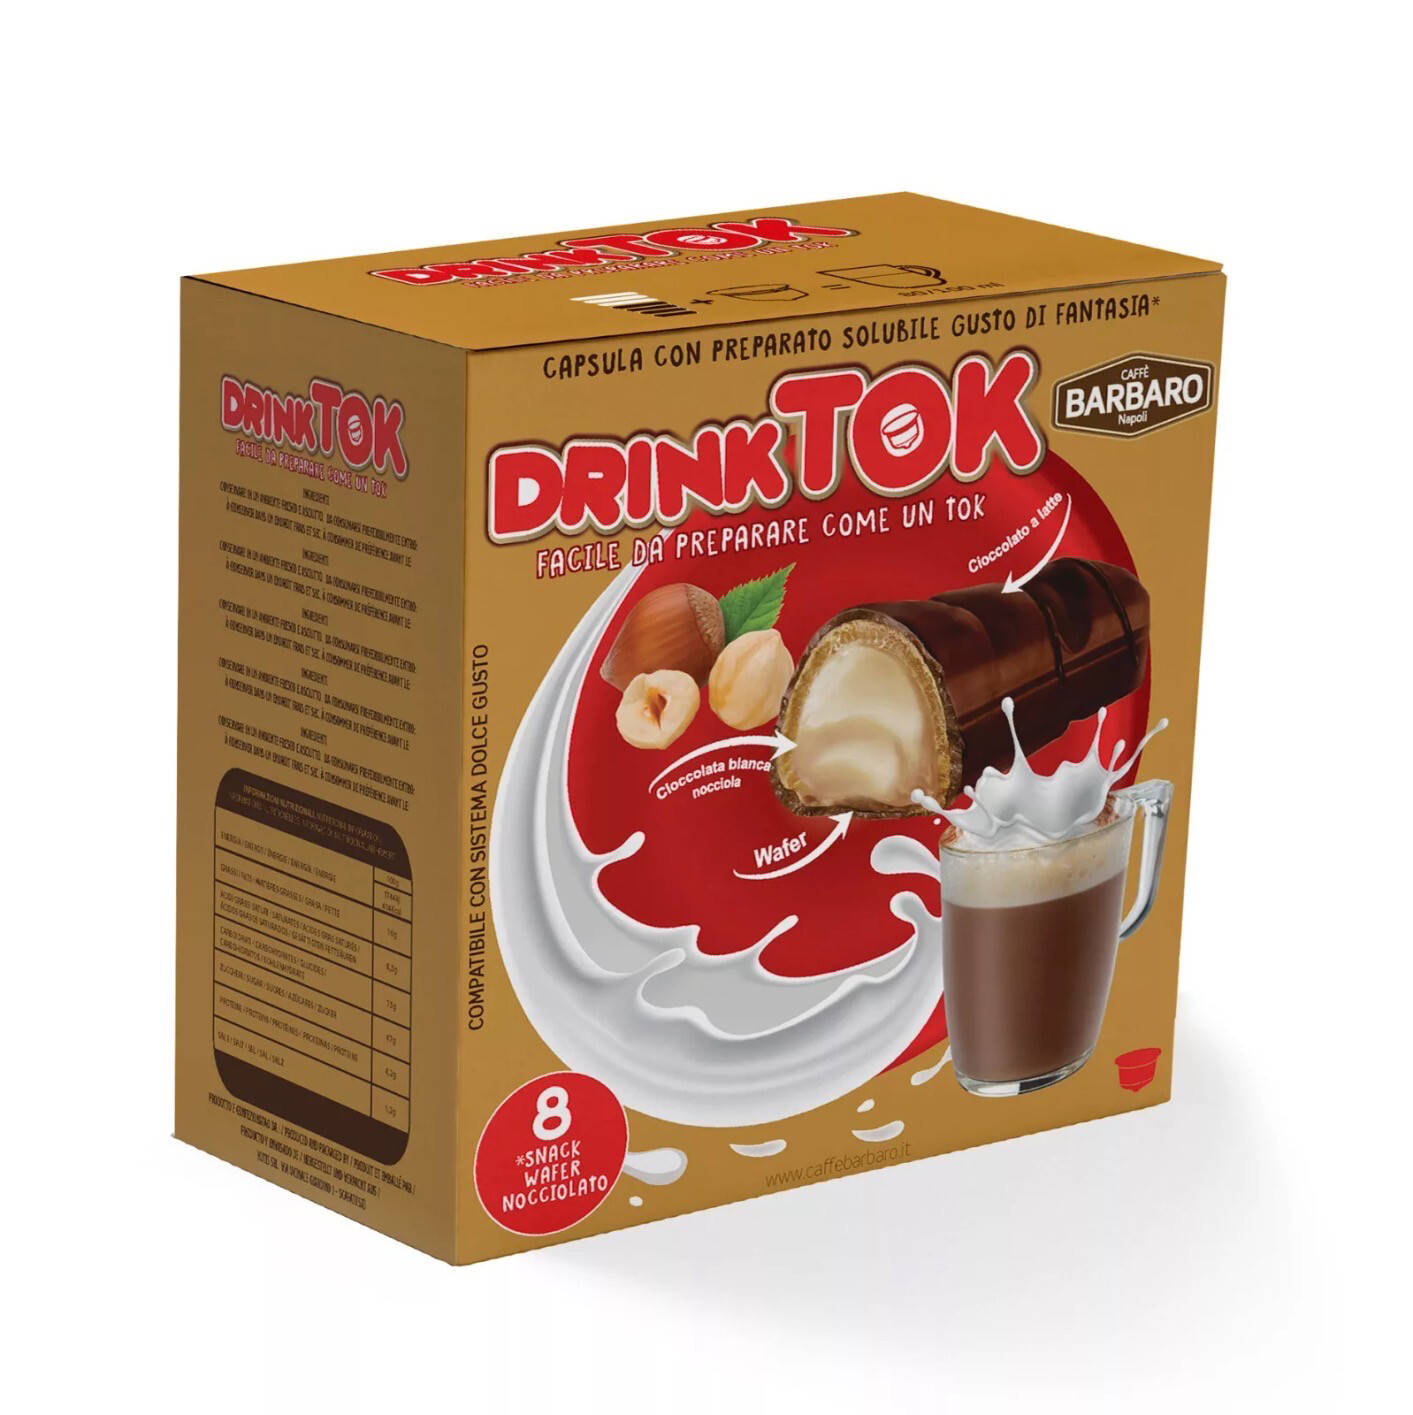 Barbaro Dolce Gusto Hot Chocolate Kinder Bueno inspired x8 капсули